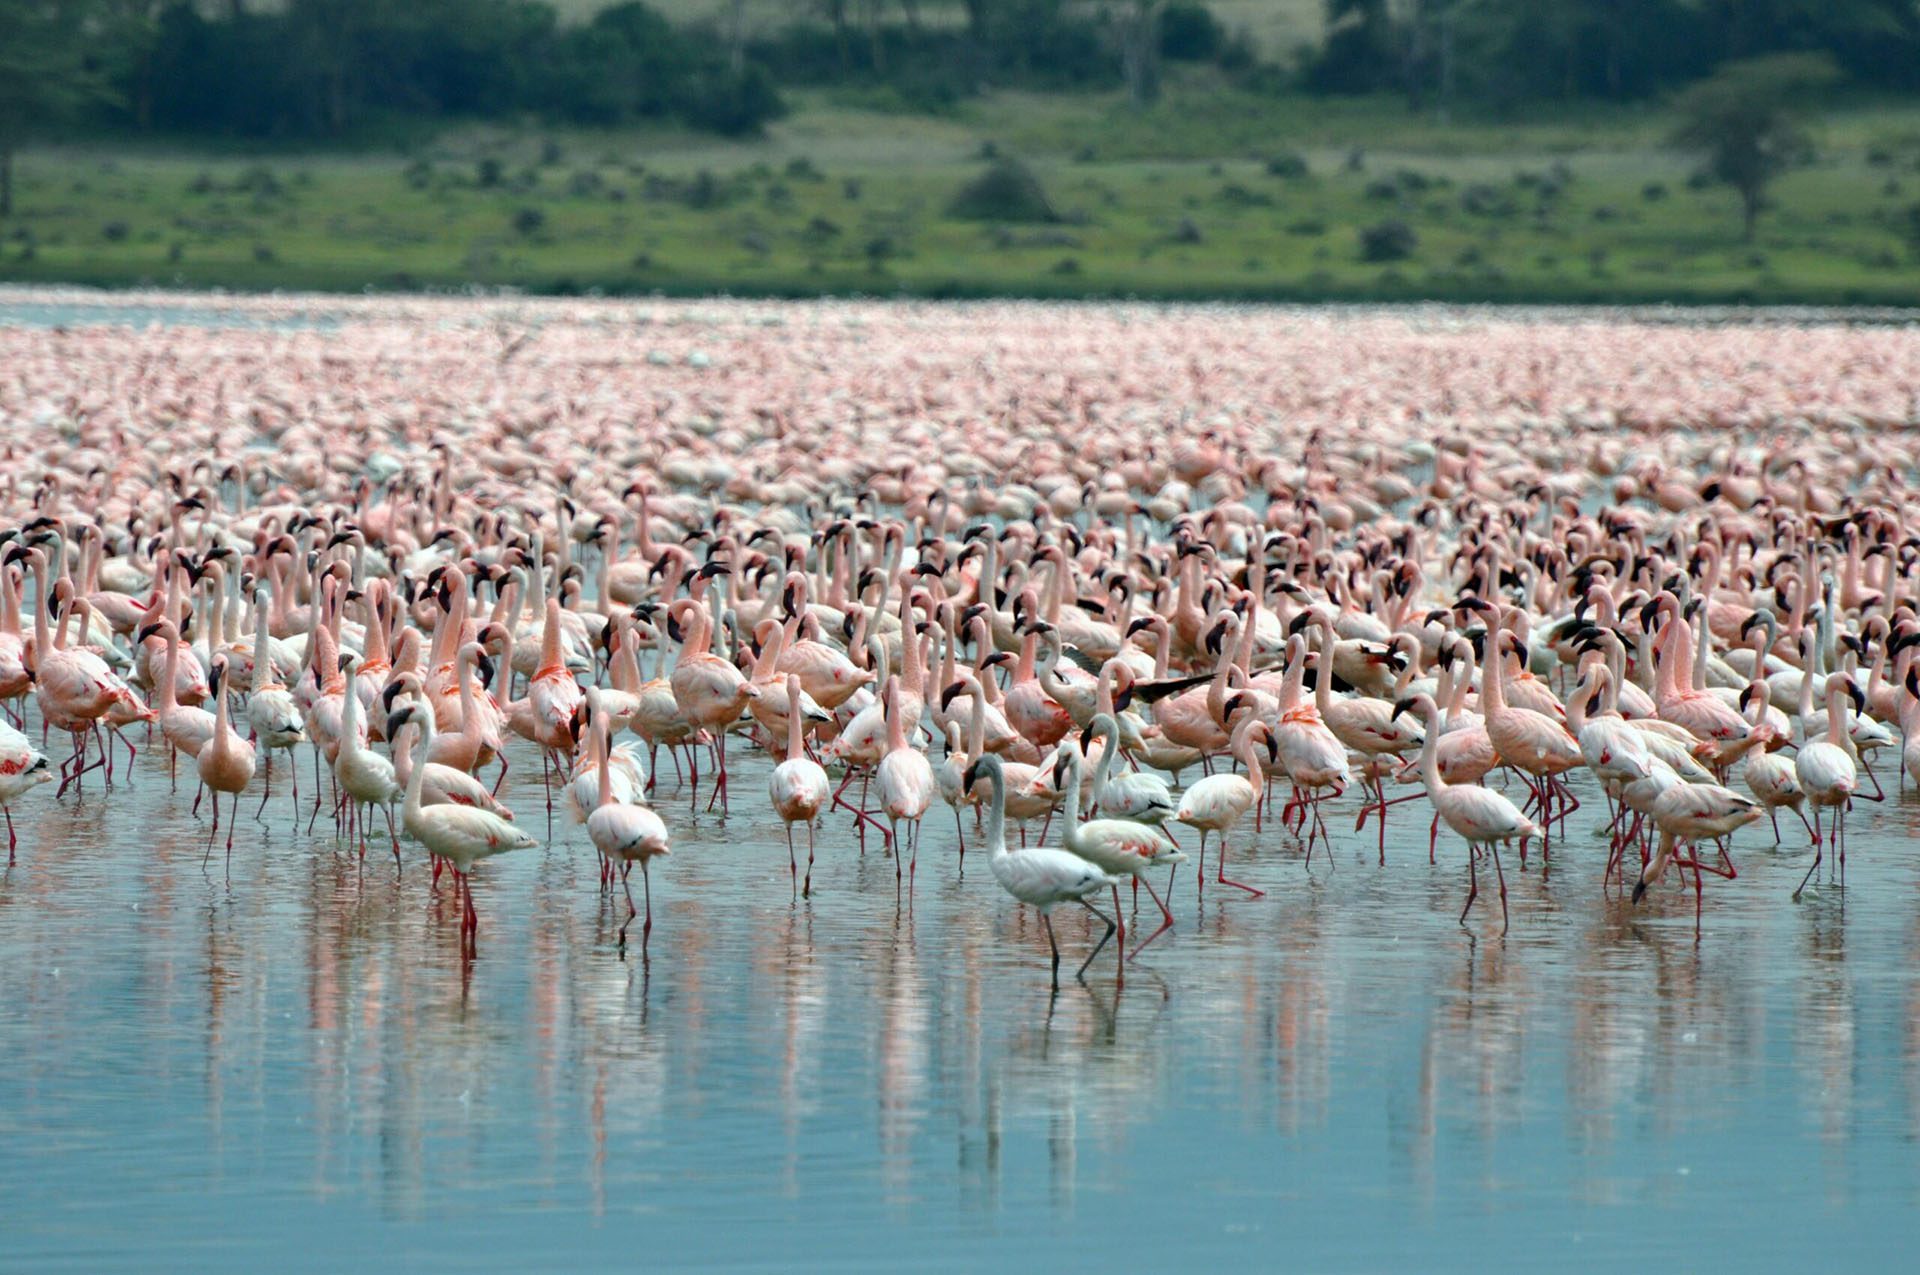 a large group of flamingos standing in the water.